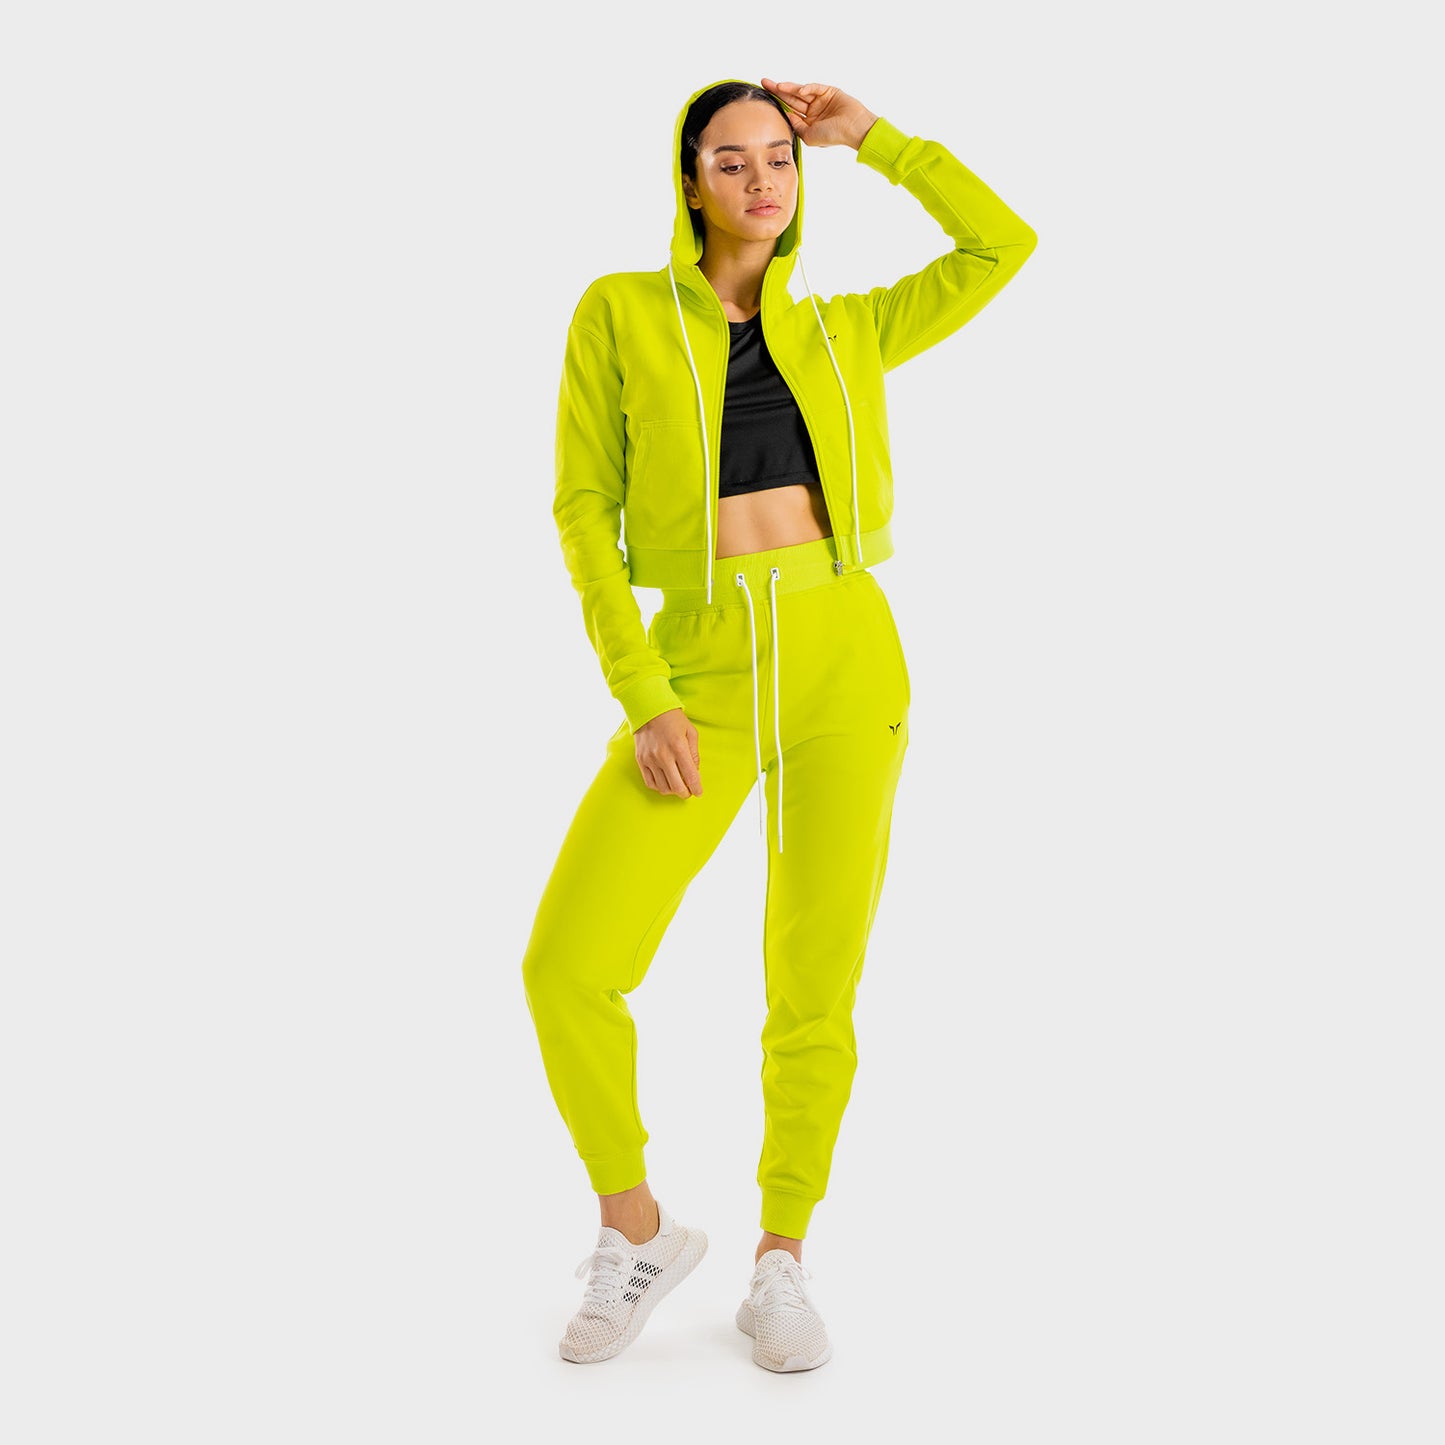 squatwolf-gym-hoodies-women-core-zip-up-neon-workout-clothes